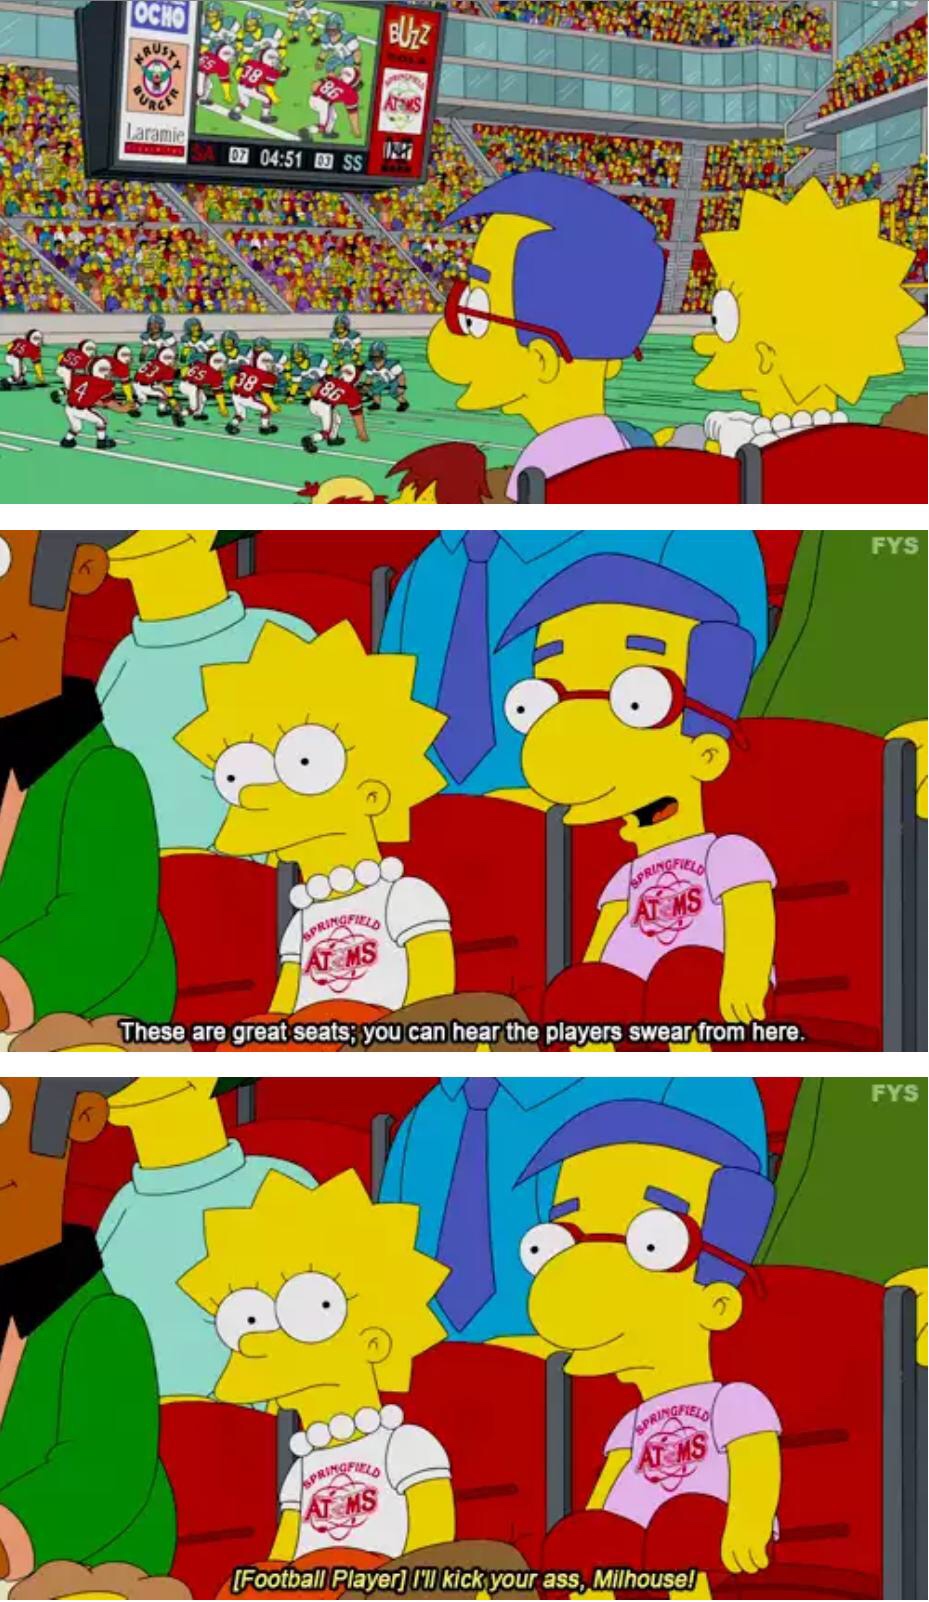 milhouse quotes - Laramie D A 07 0 Ss Per Sulit Fys 40 Sprint Ringfield These are great seats you can hear the players swear from here. Fys Ringfiel Imgfirls Football Player 0'1 kick your ass, Milhouse!